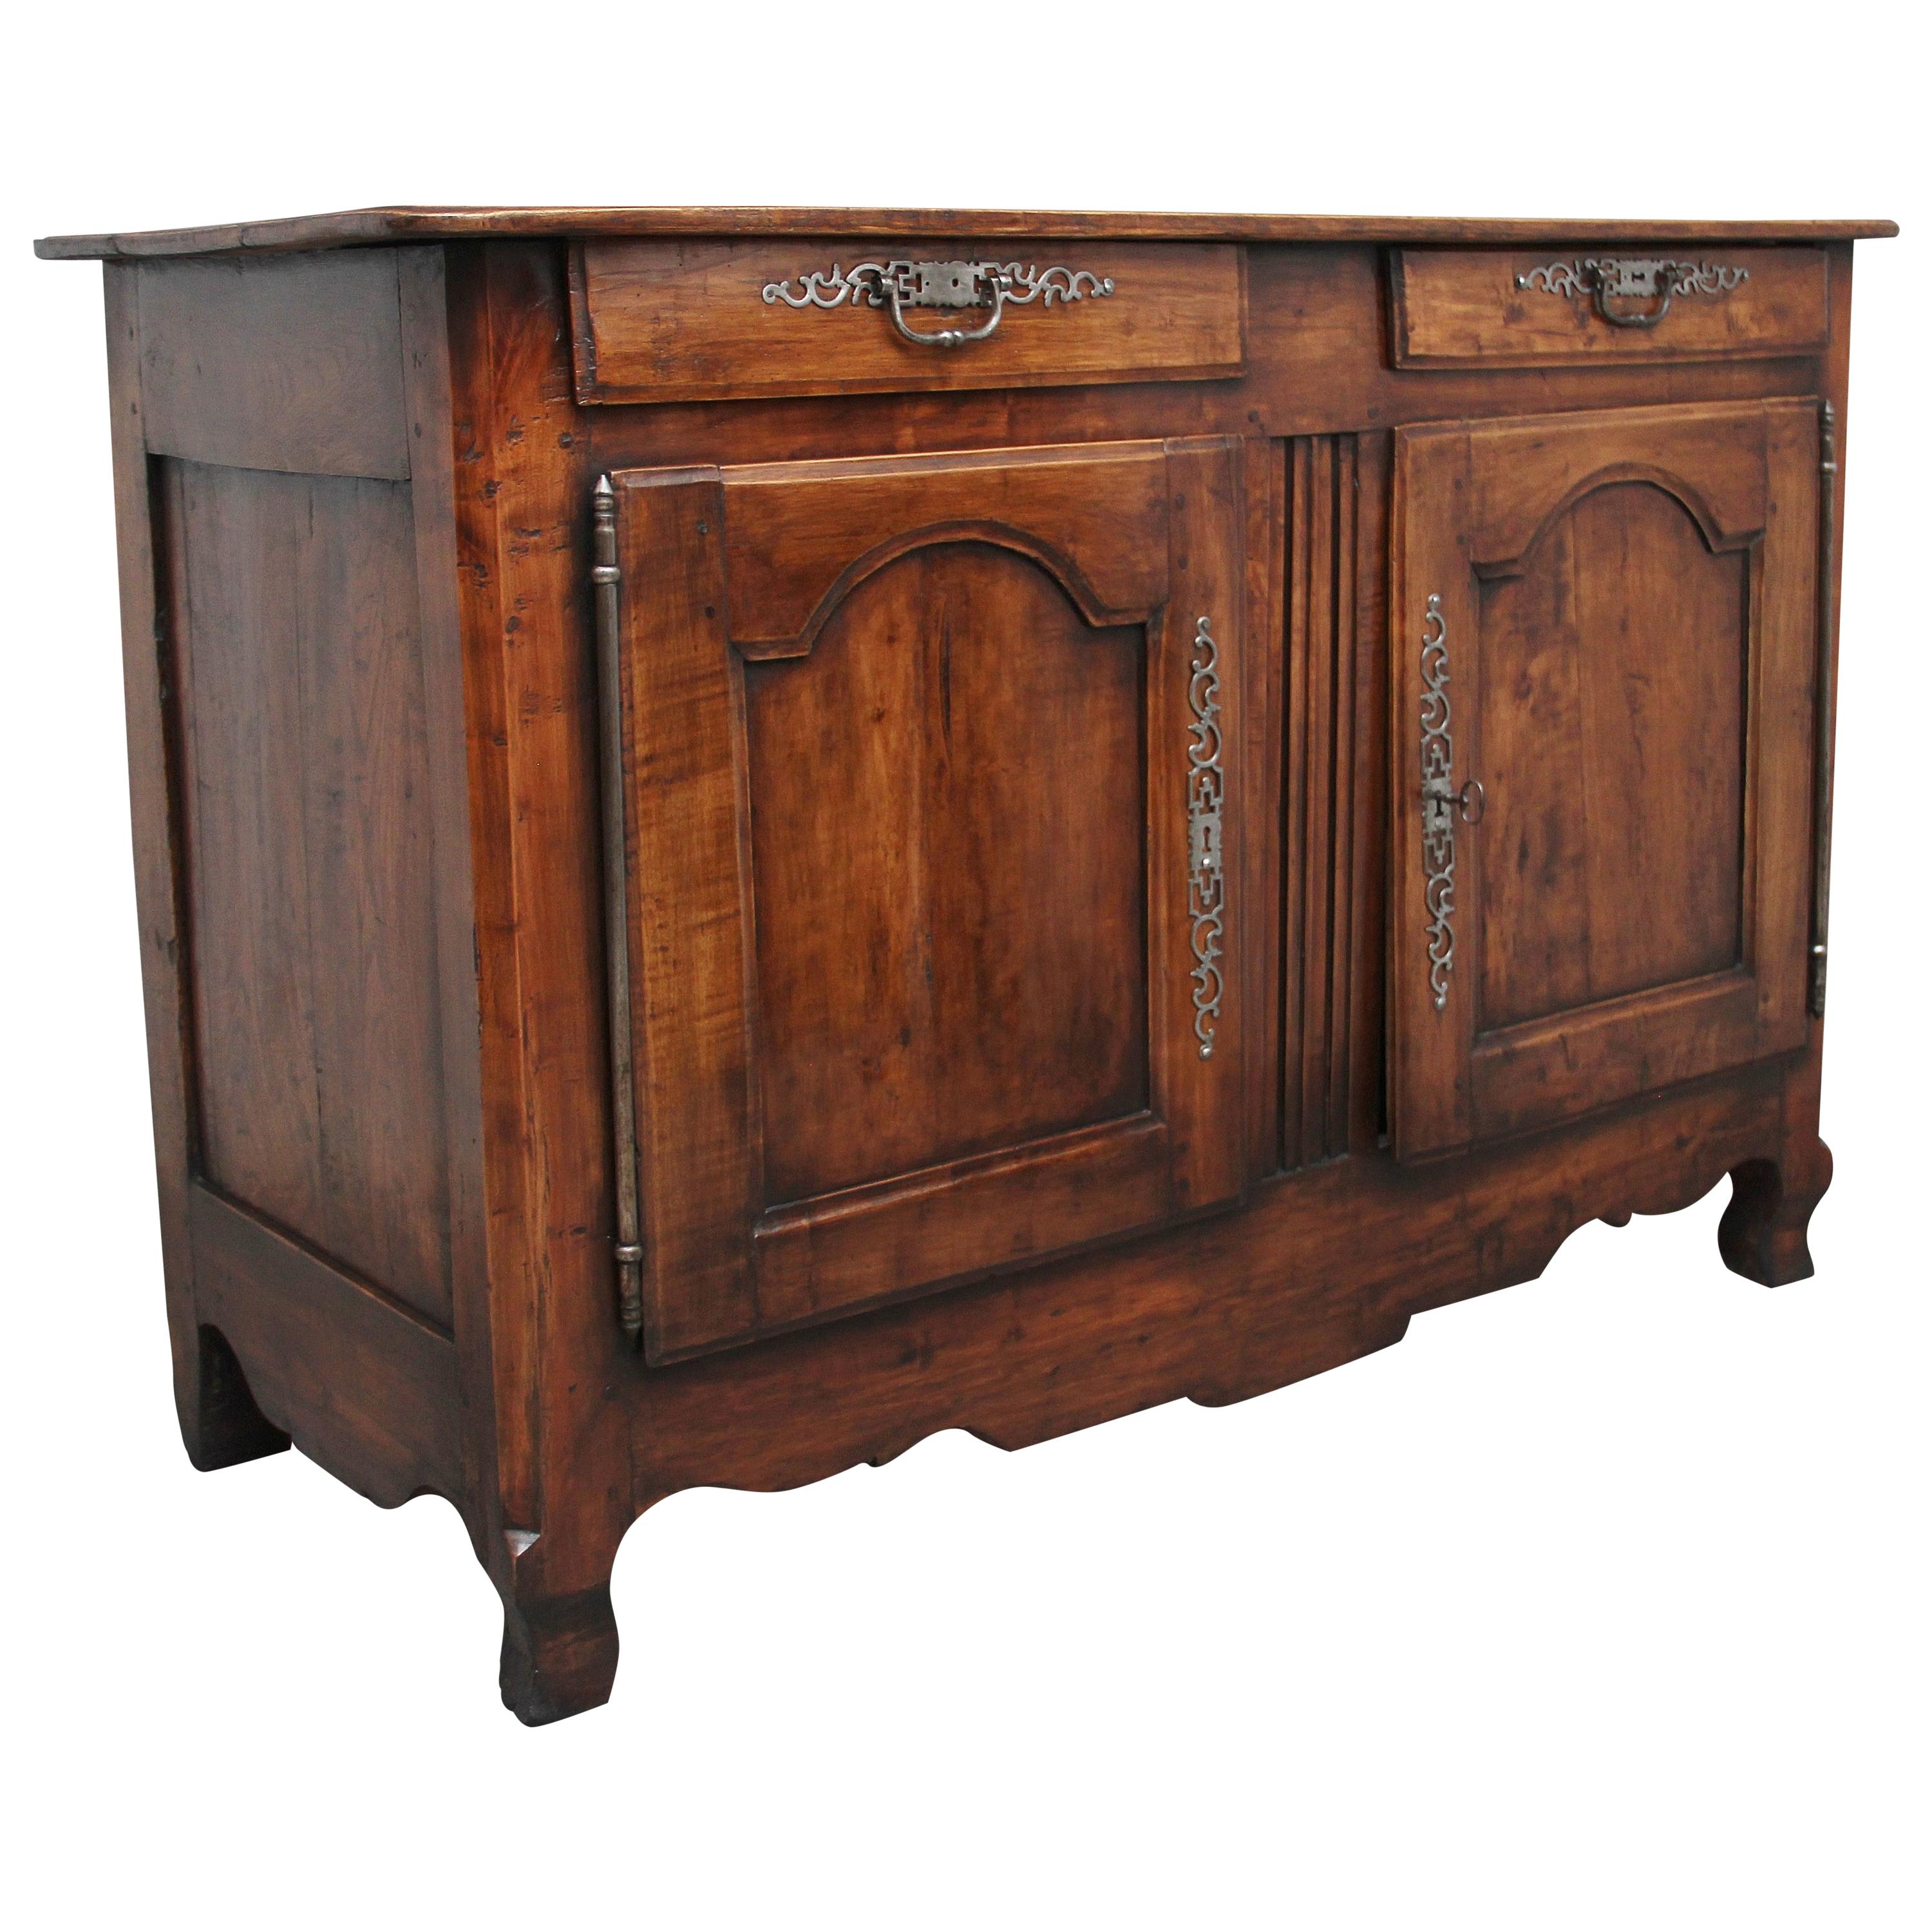 Early 19th Century French Cherrywood Dresser